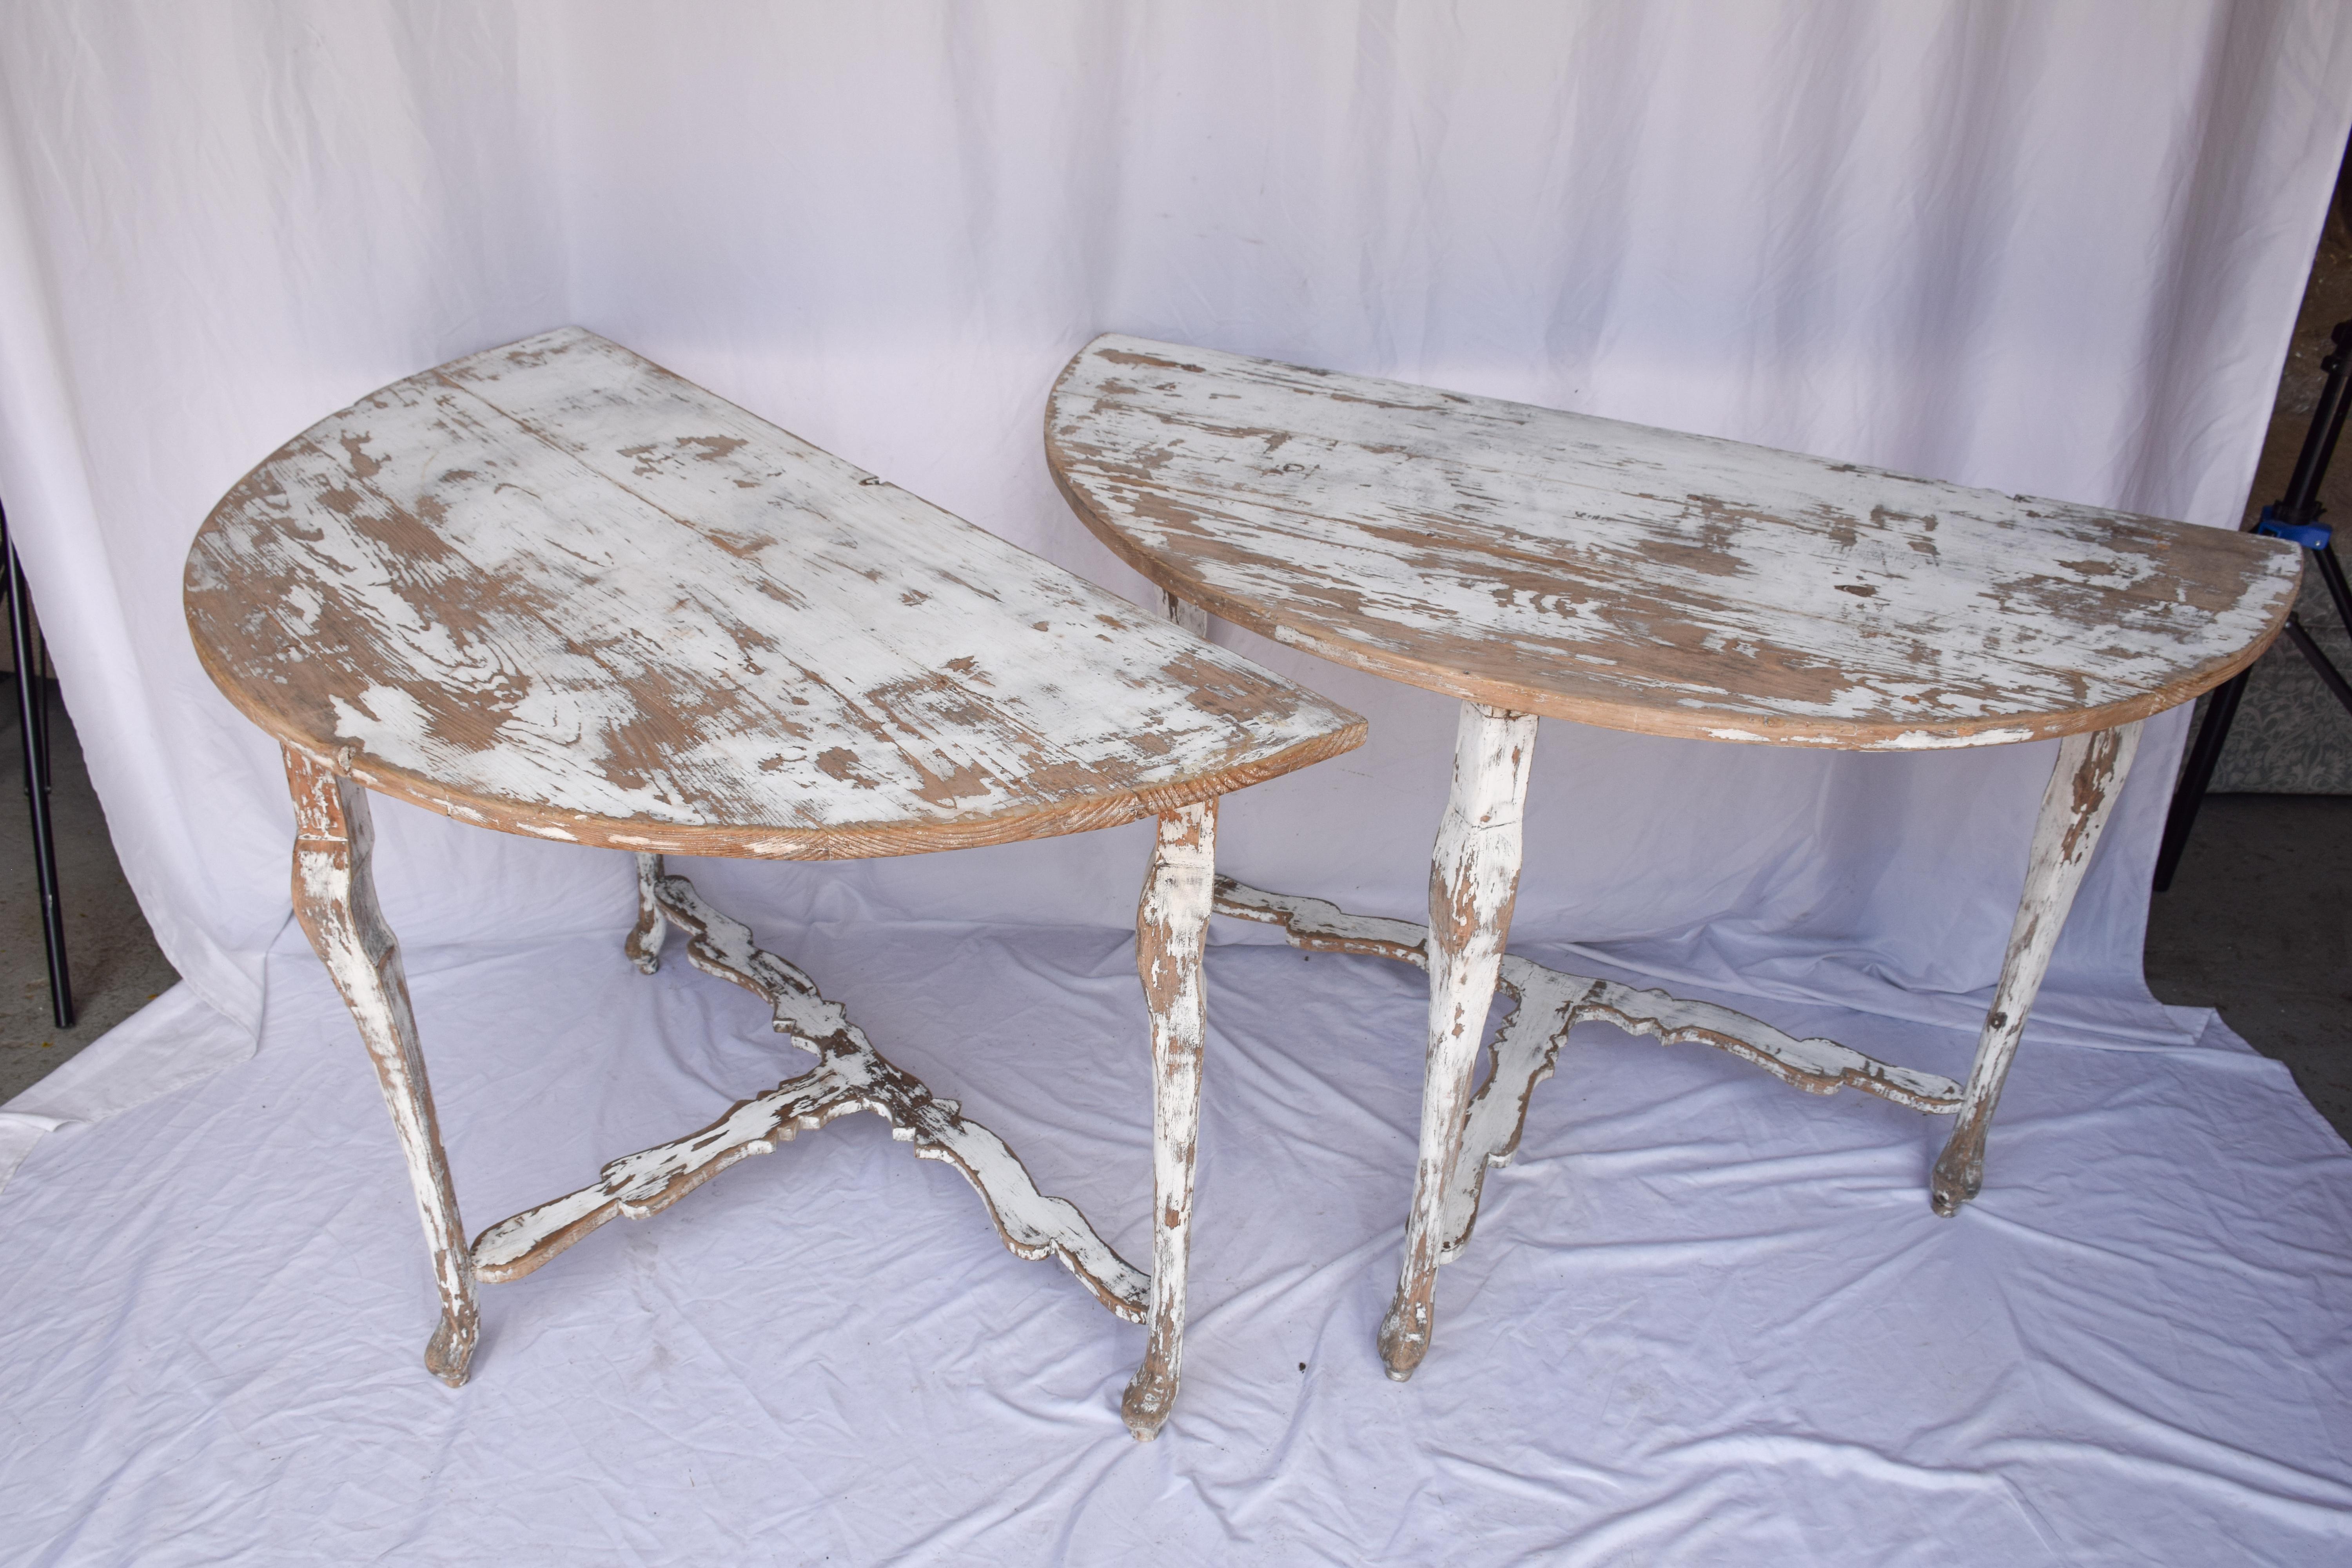 Pair of Swedish Demi Lune Tables. Featuring a worn painted patina. The tables are sold as a pair. 

This pair of Swedish 19th century demi lune tables will bring some whimsy and cheer into a living room, bedroom, or sun room.

Individually - 23